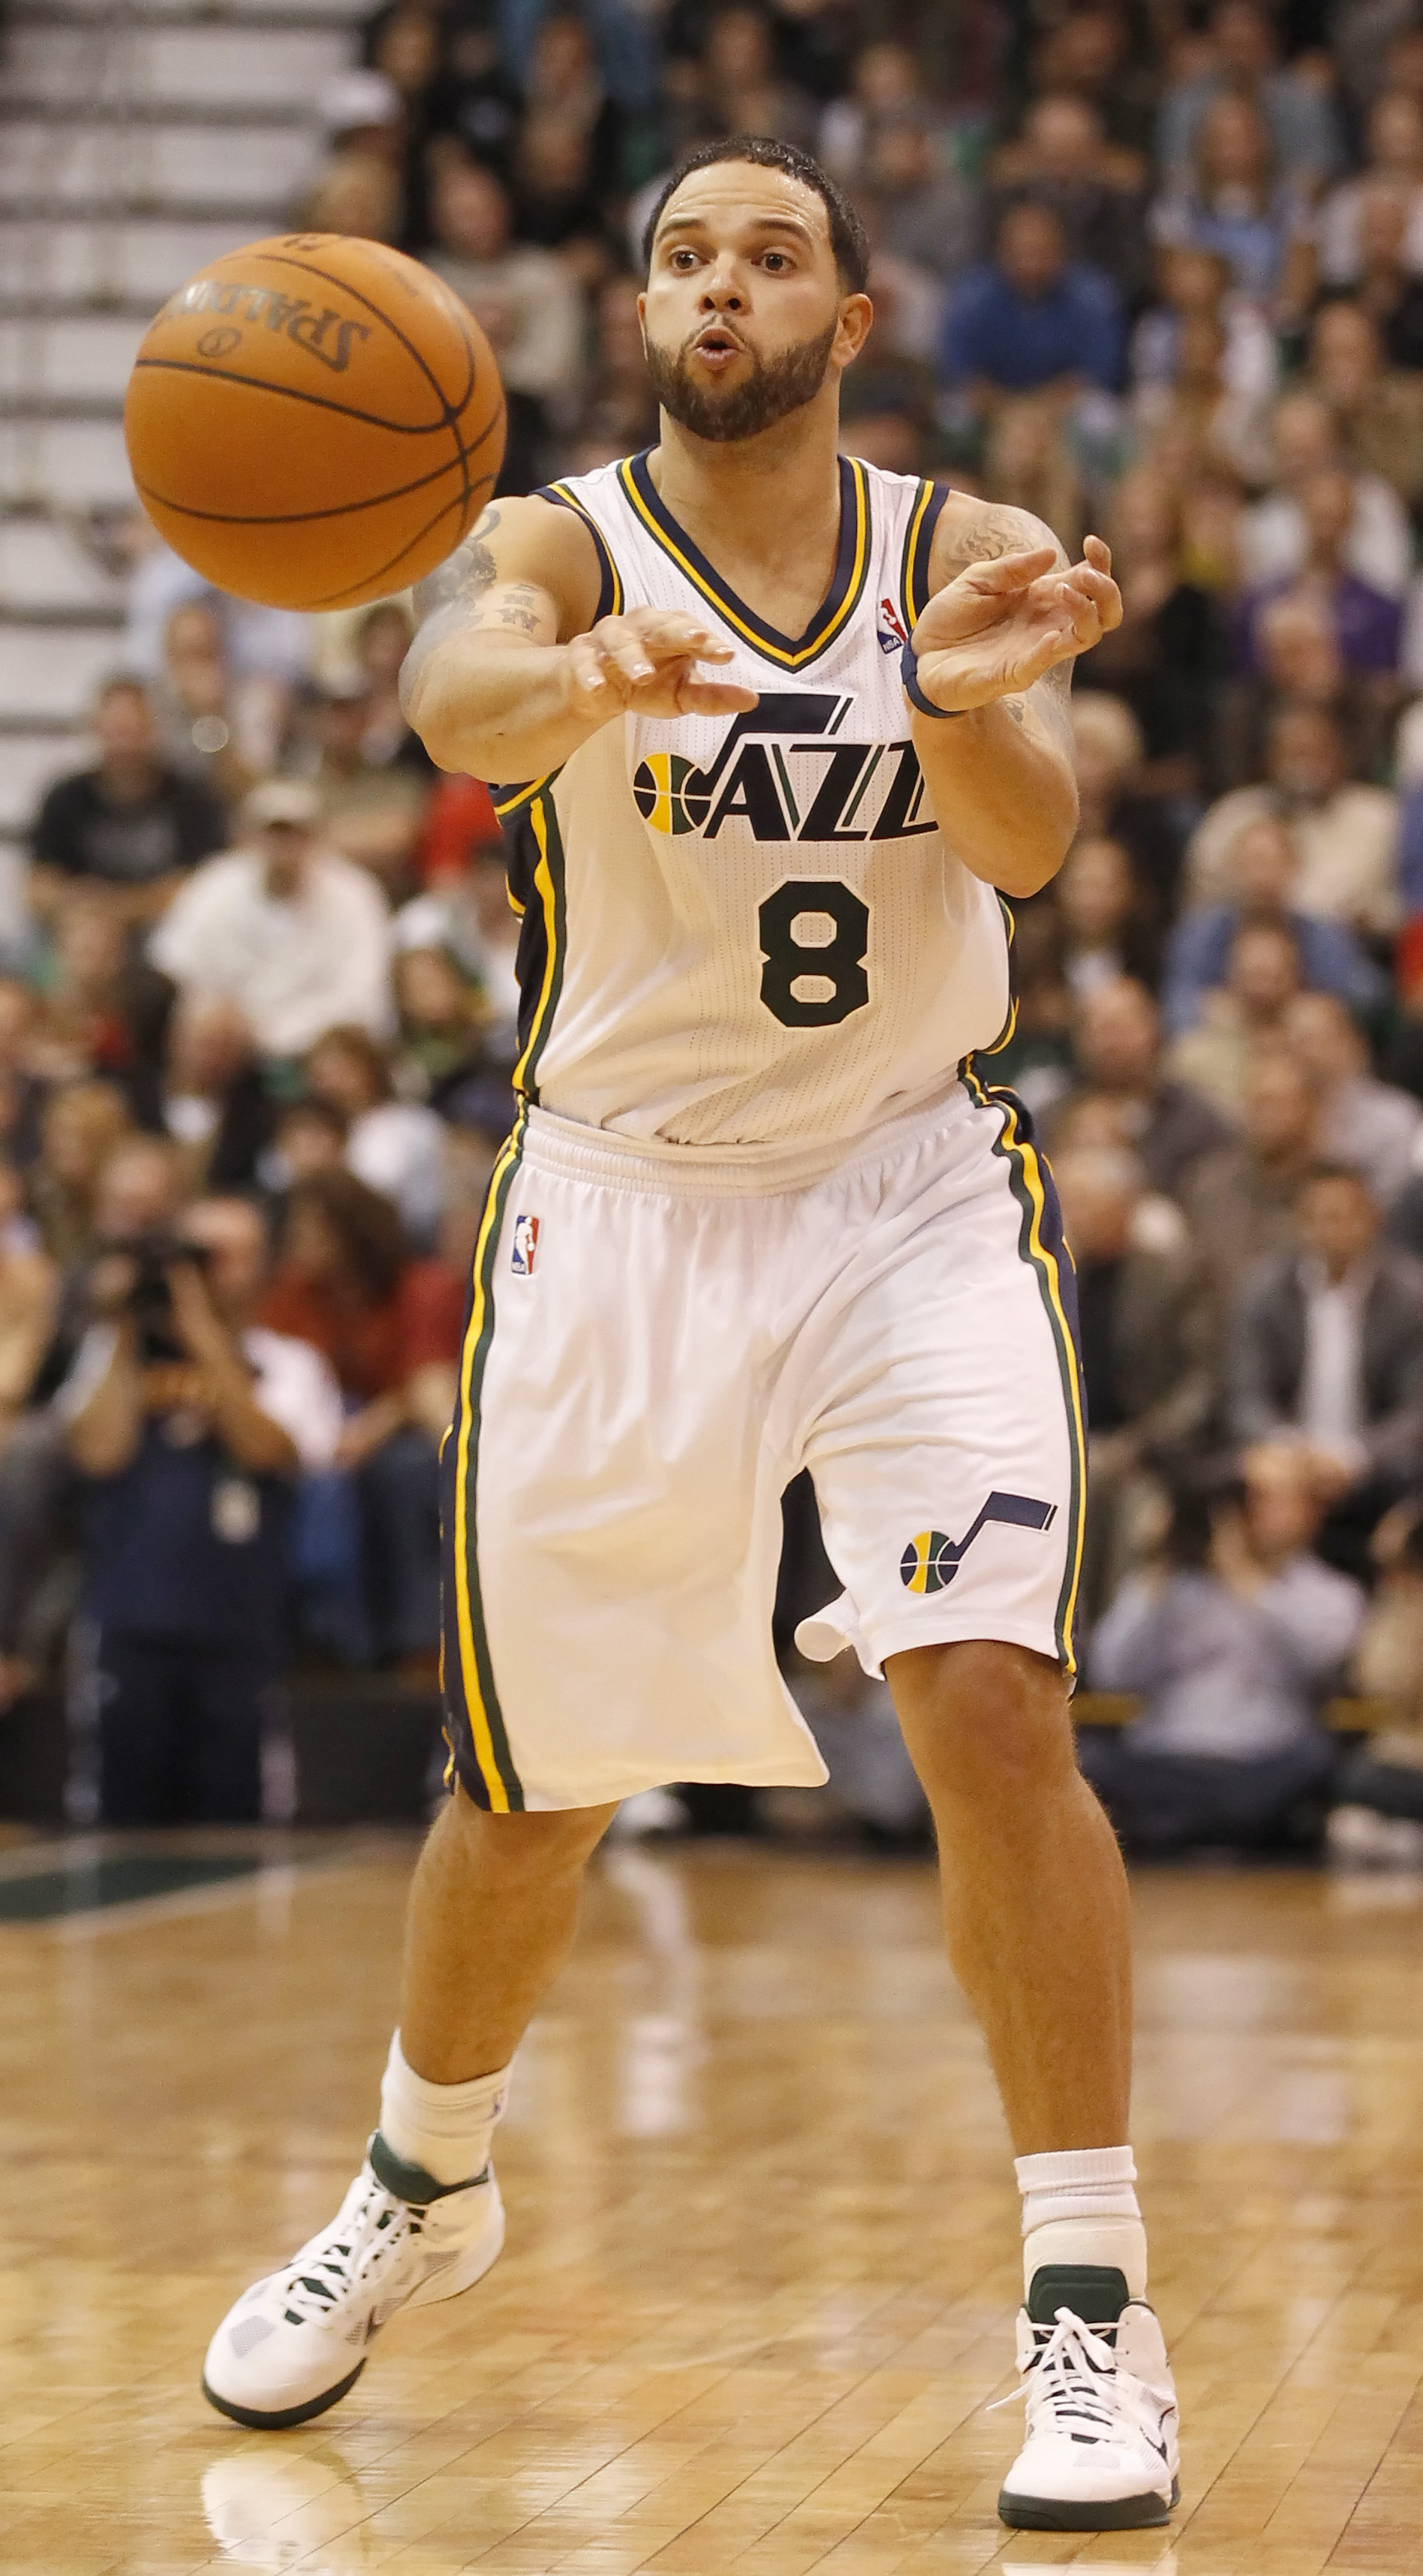 SALT LAKE CITY, UT - DECEMBER 8:  Deron Williams #8 of the Utah Jazz passes the ball during a game against the Miami Heat during the second half of an NBA game December 8, 2010 at Energy Solutions Arena in Salt Lake City, Utah. The Heat beat the Jazz 111-